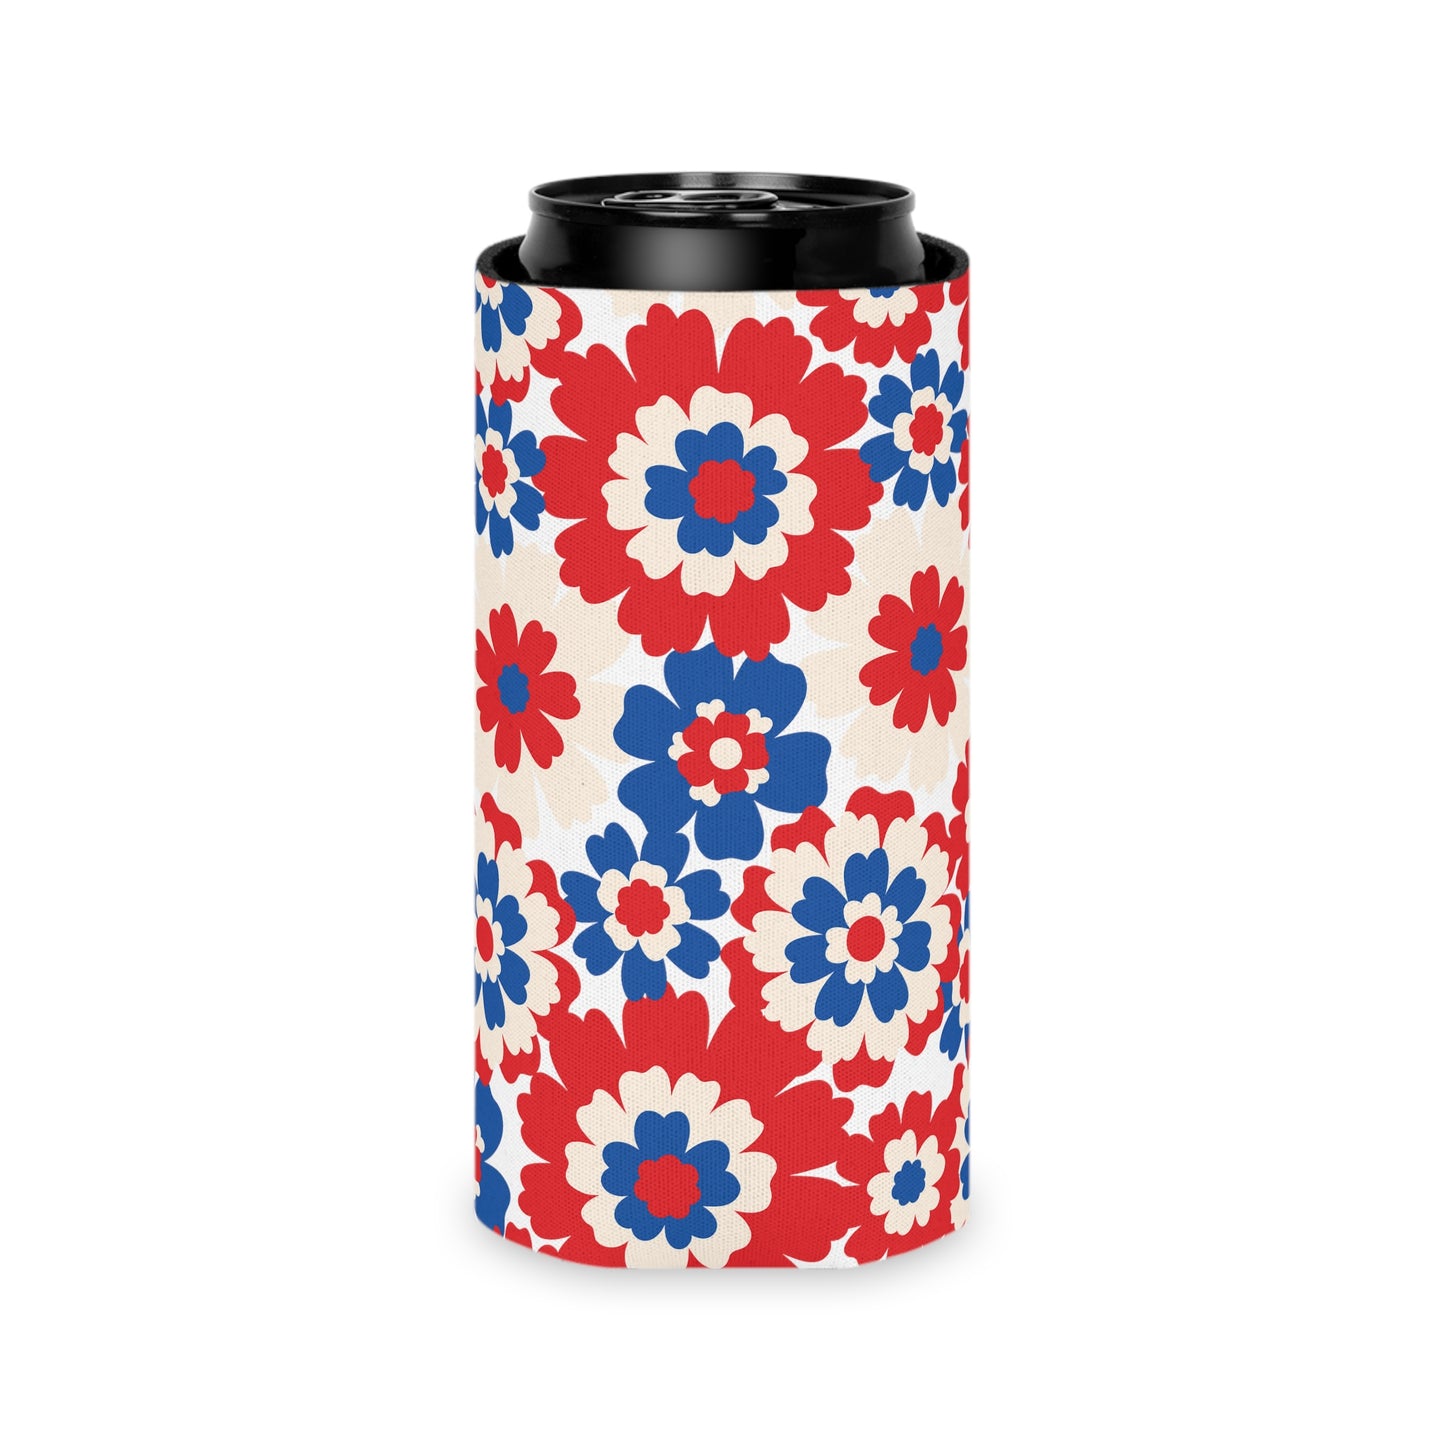 4th of july patriotic flower can cooler in red white and blue flower print